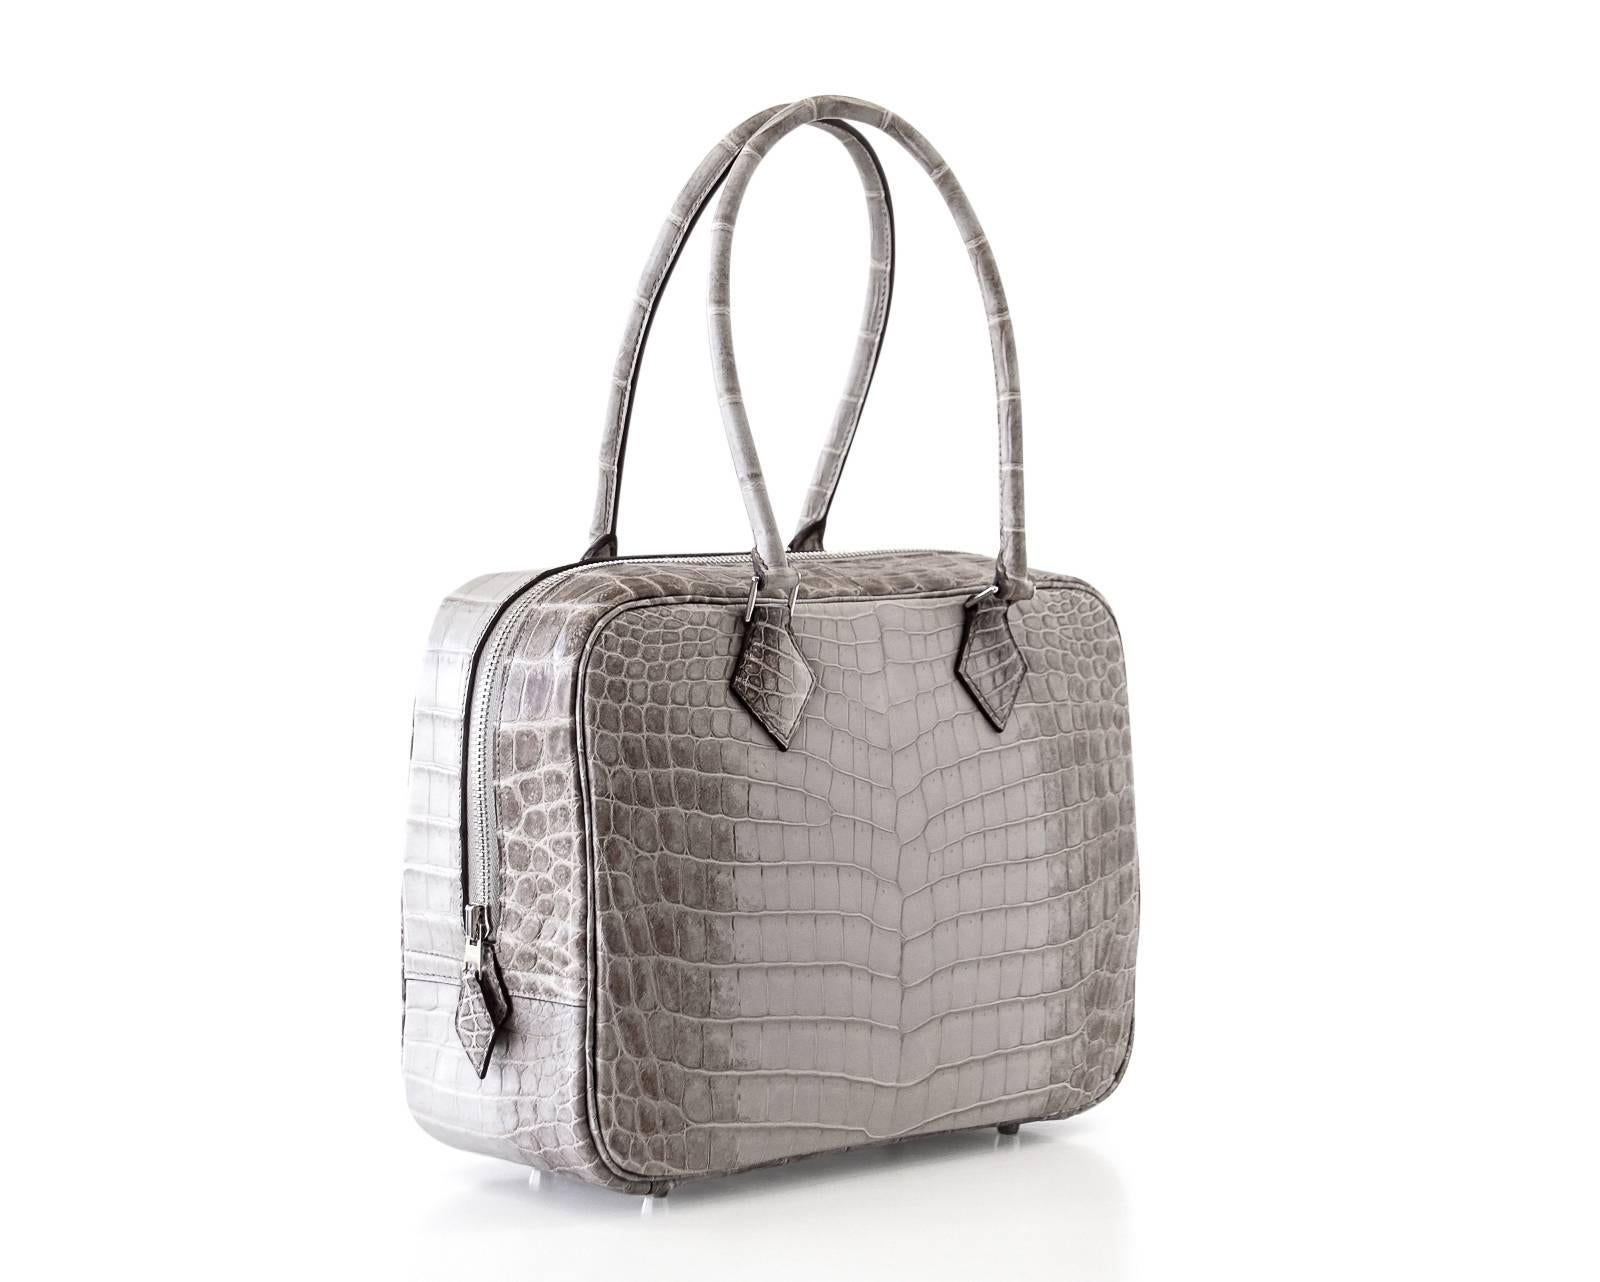 Guaranteed authentic Hermes Plume 28 Bag in rare Gris Cendre Himalaya.
The most rare colour in Himalaya is just as extremely rare in a Plume.
The ultimate chic bag that sets you apart.
Beautiful scales and gradation of hue.
Comes with sleeper and